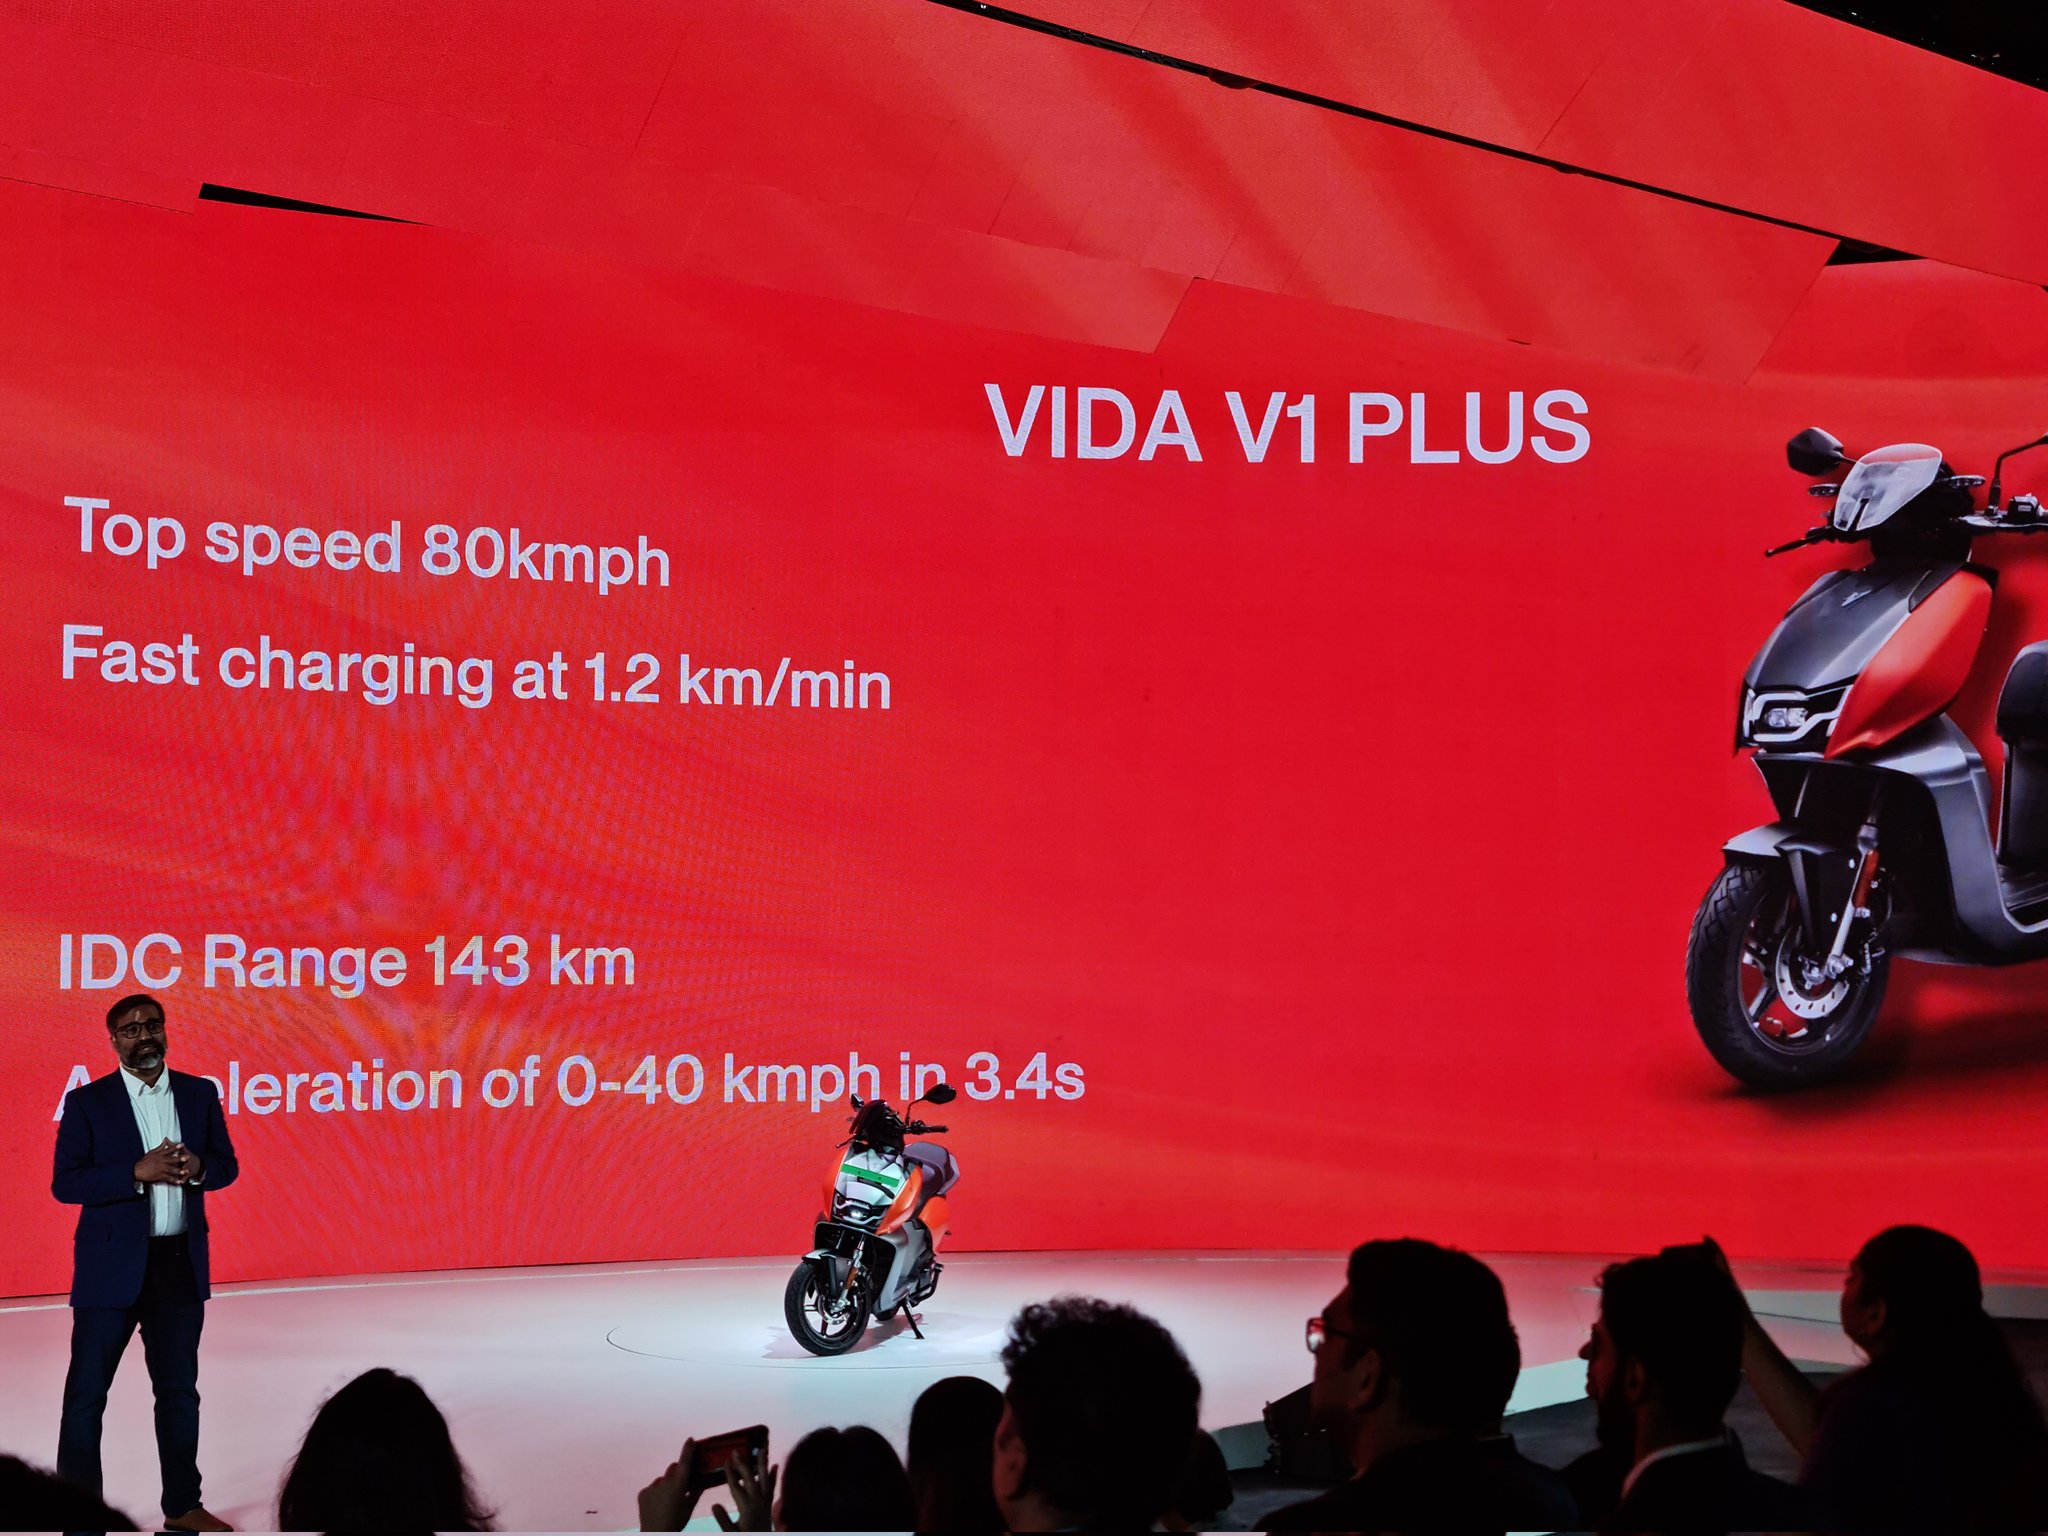 https://e-vehicleinfo.com/hero-vida-v1-electric-scooter-launched-price/